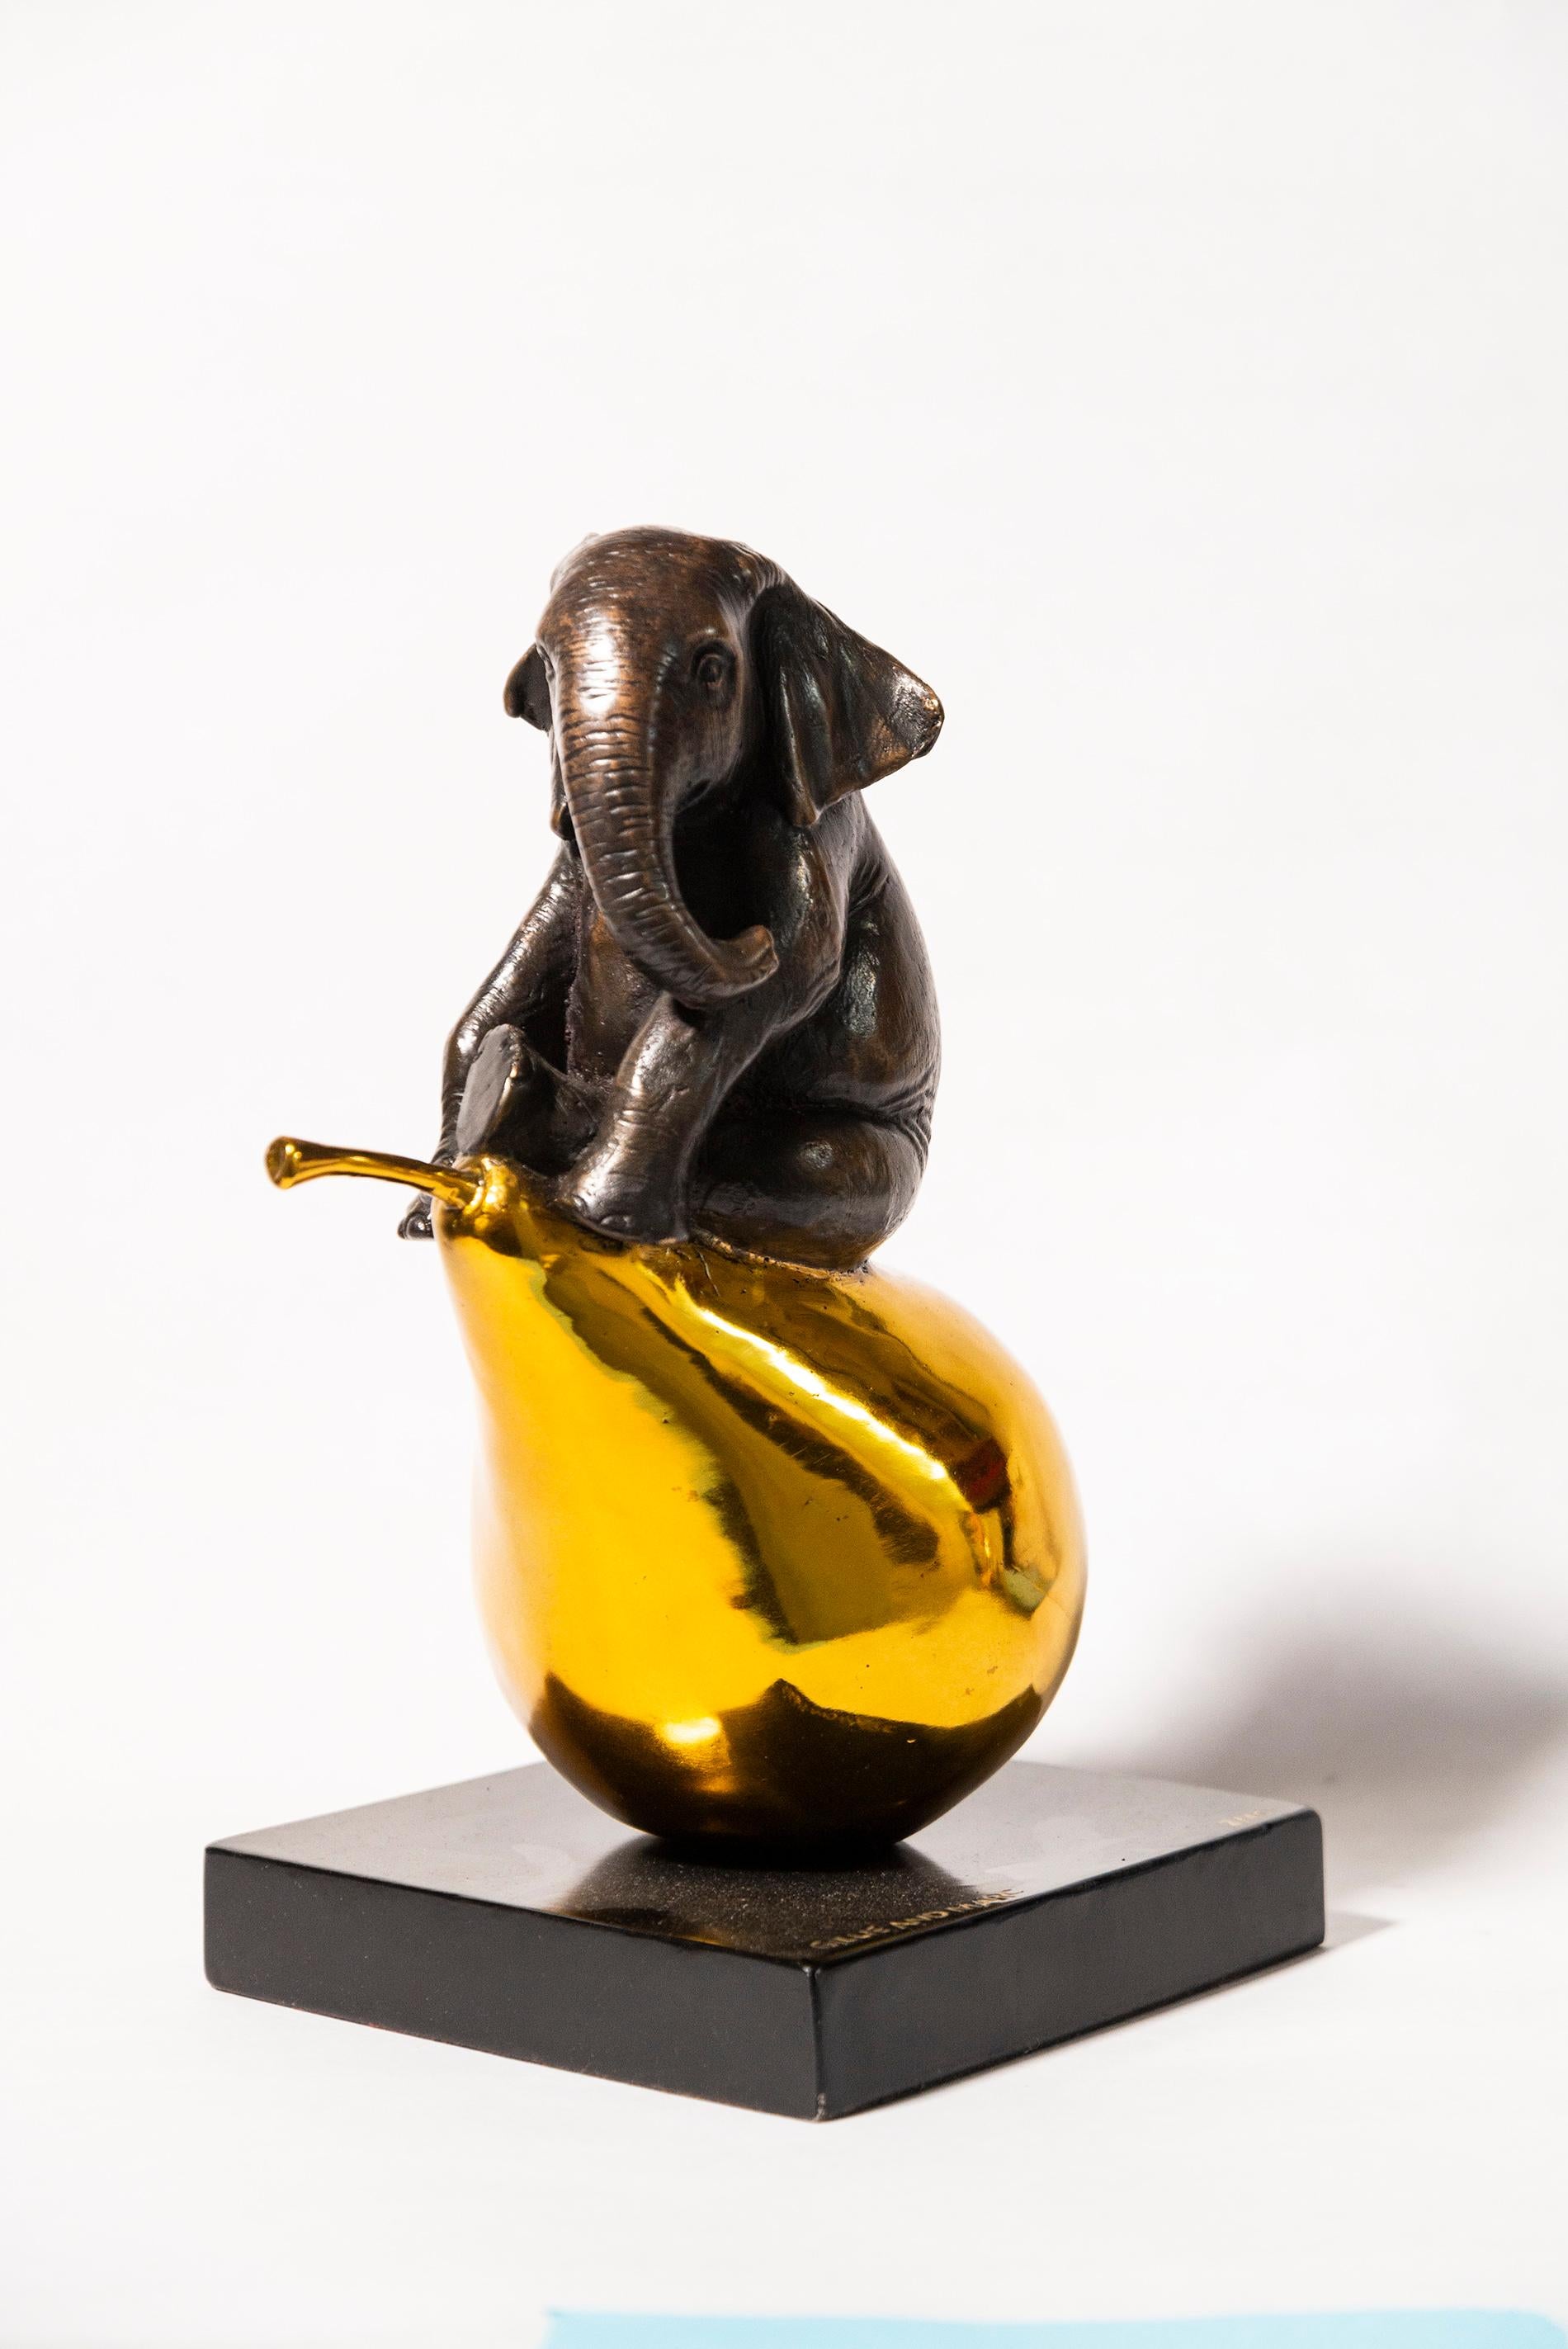 The elephant was just pearfect 2/40 - playful, contemporary, bronze sculpture - Sculpture by Gillie and Marc Schattner